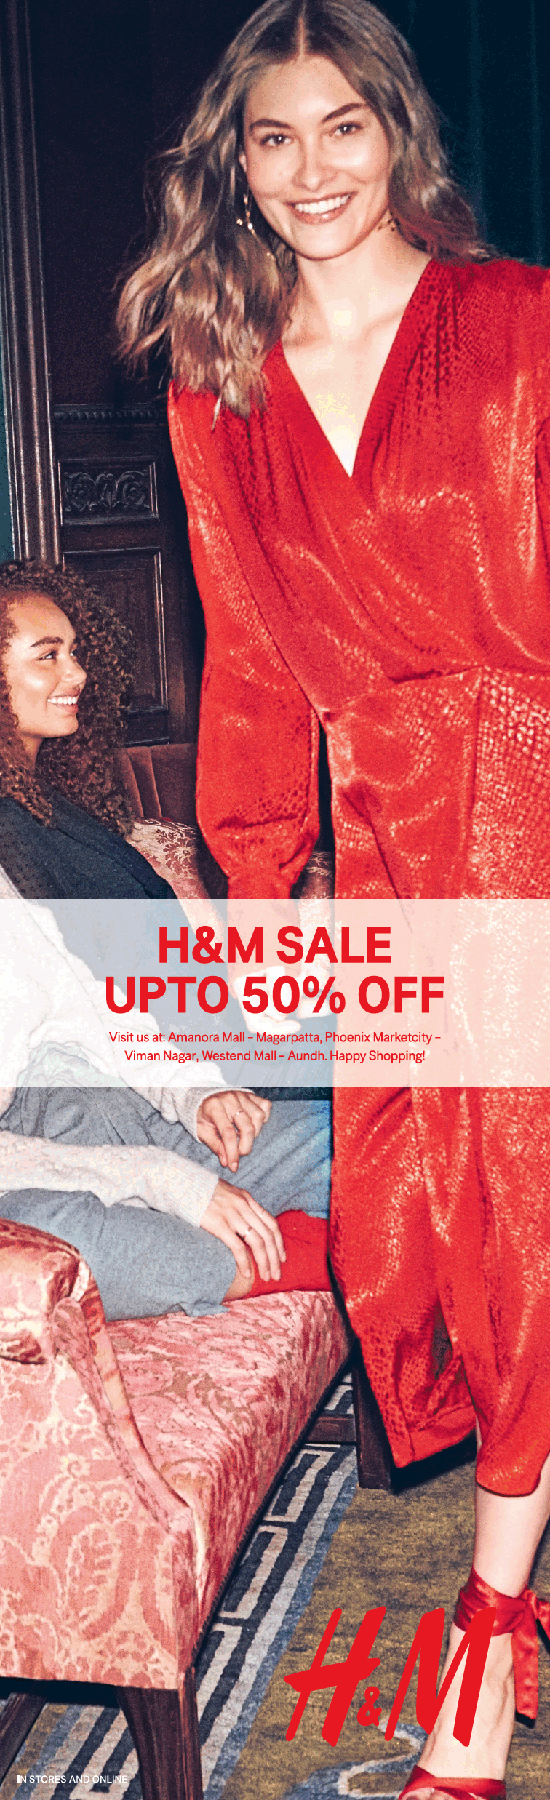 H And M Sale Upto 50% Off Ad in Pune Times - Advert Gallery